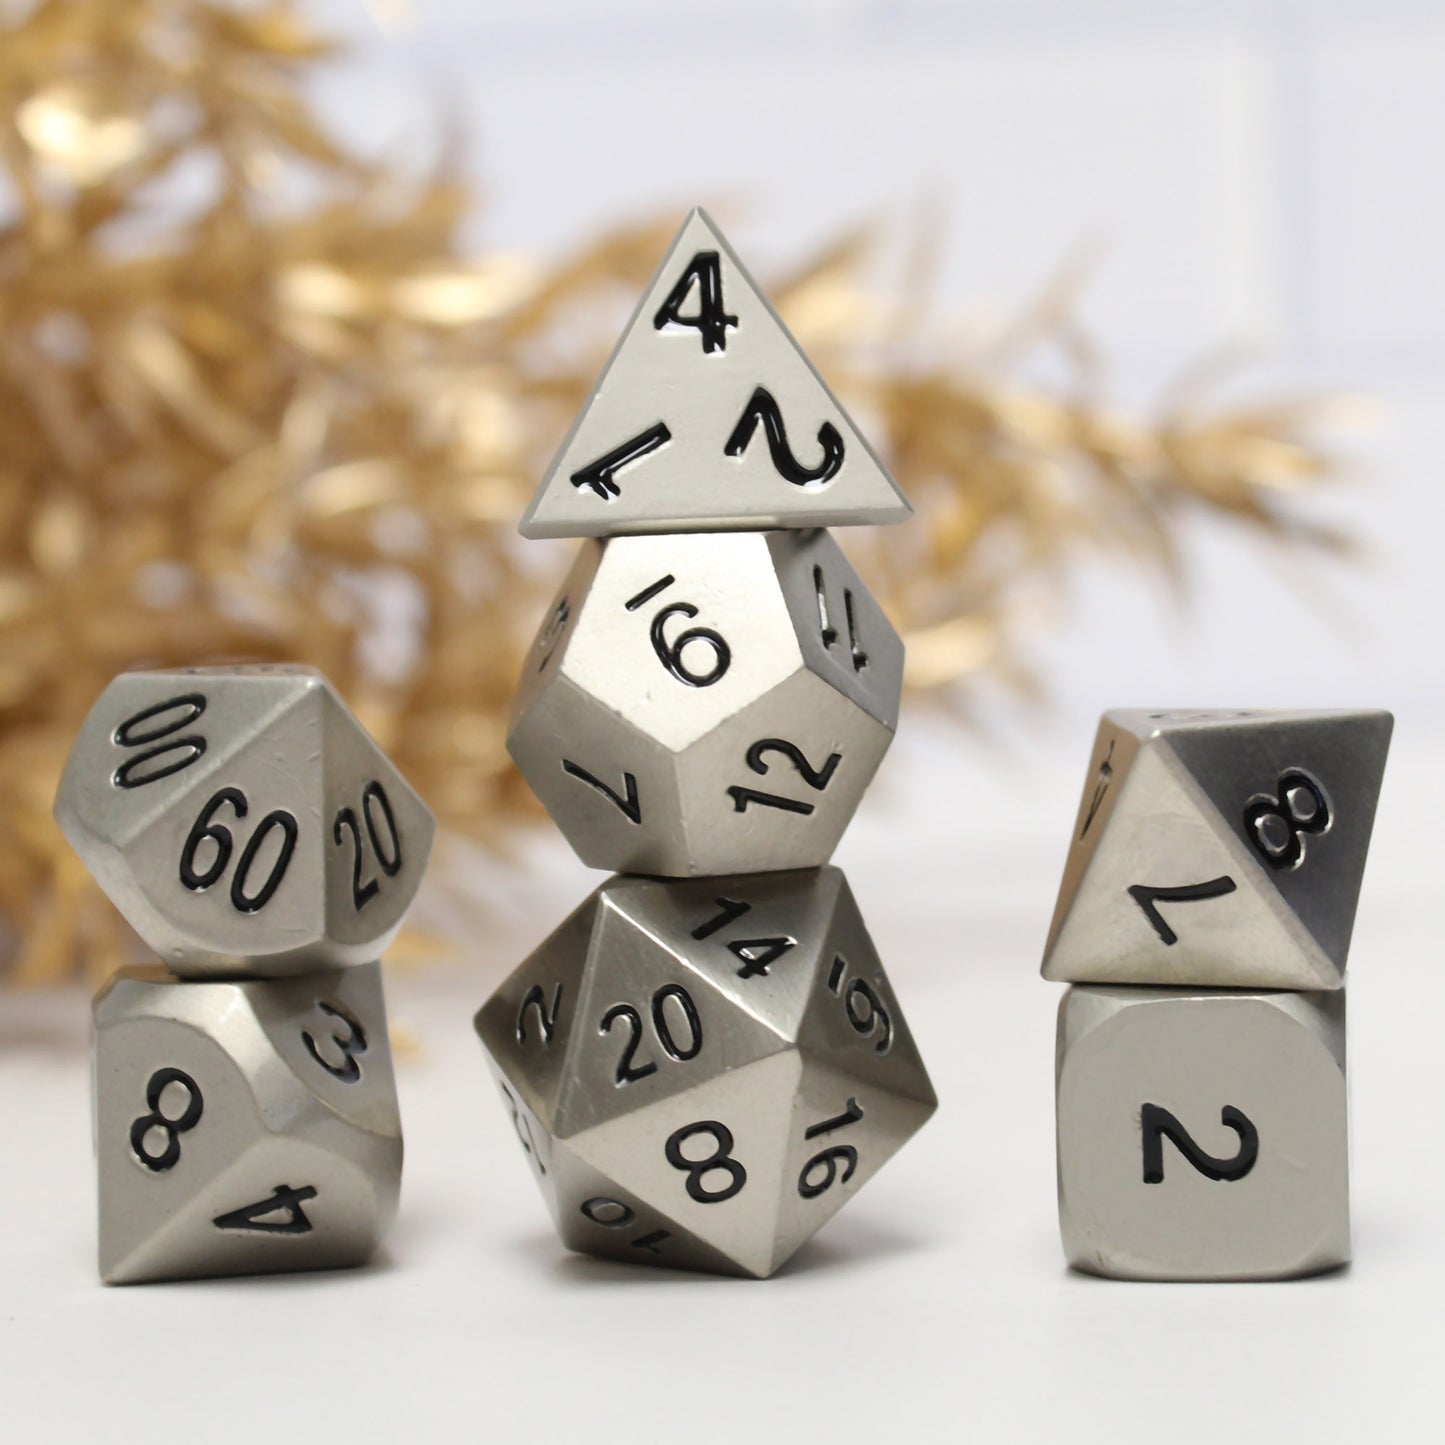 Metal Bright Silver Dice Set with Display Box